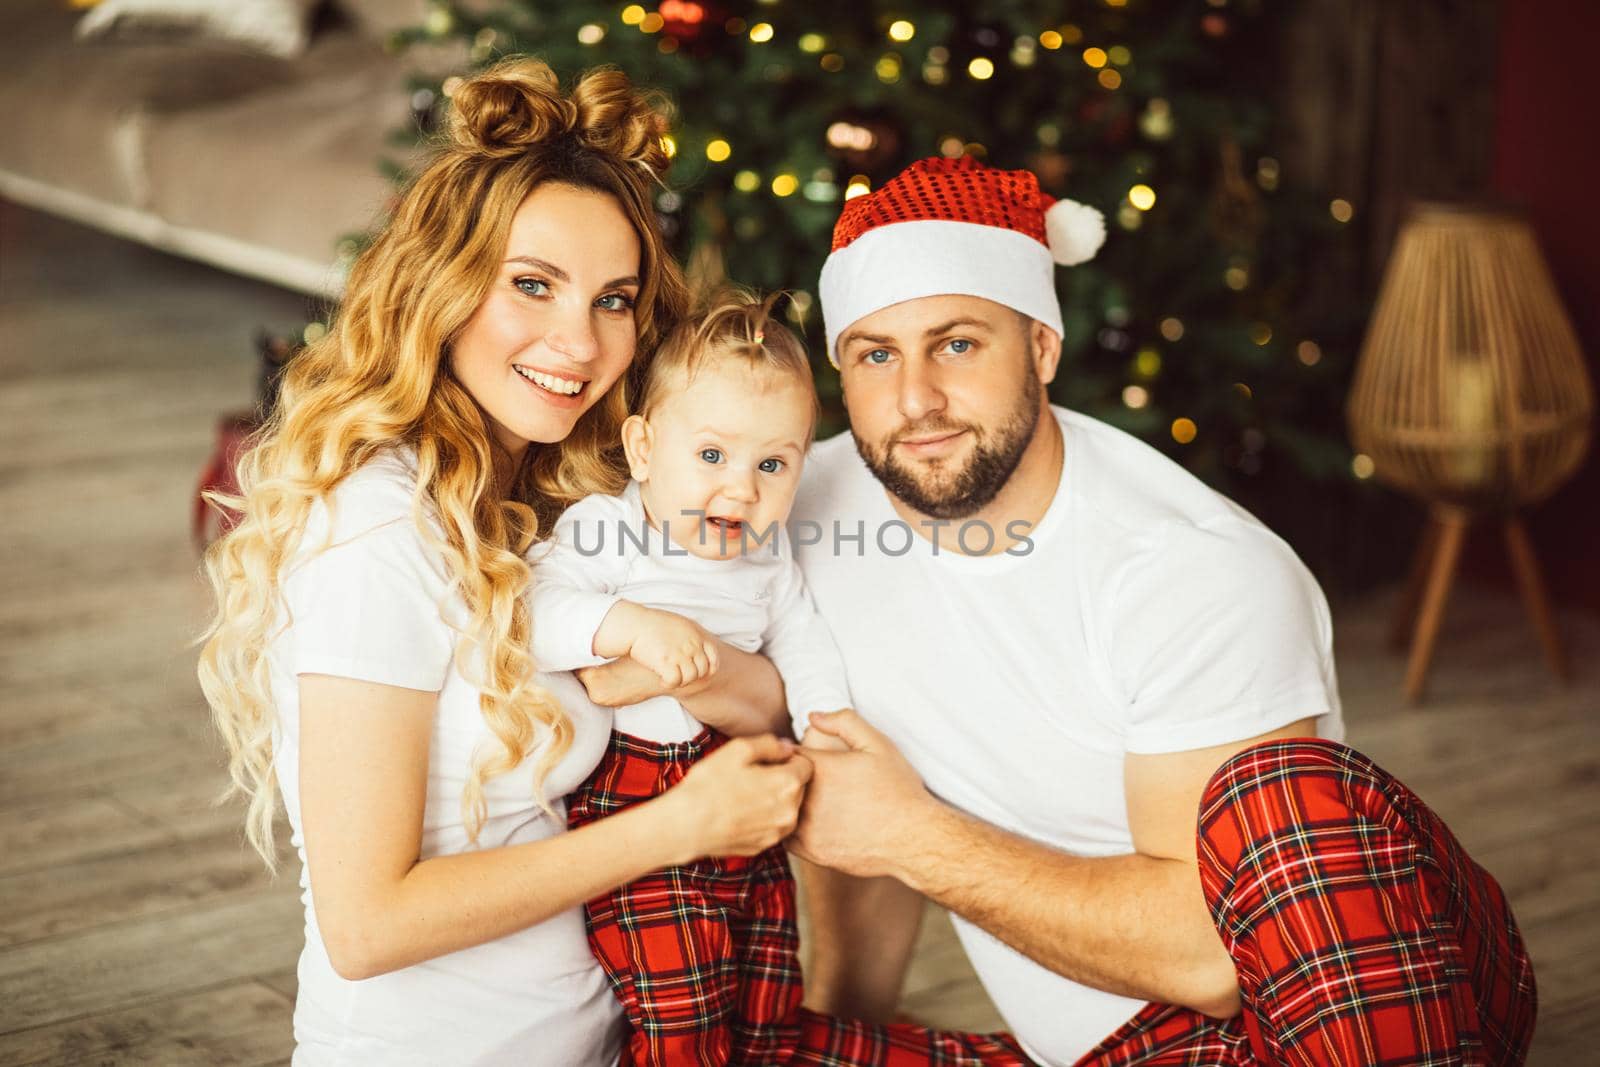 Waist up of smiling couple and cute kid sitting on floor with Christmas tree on the background